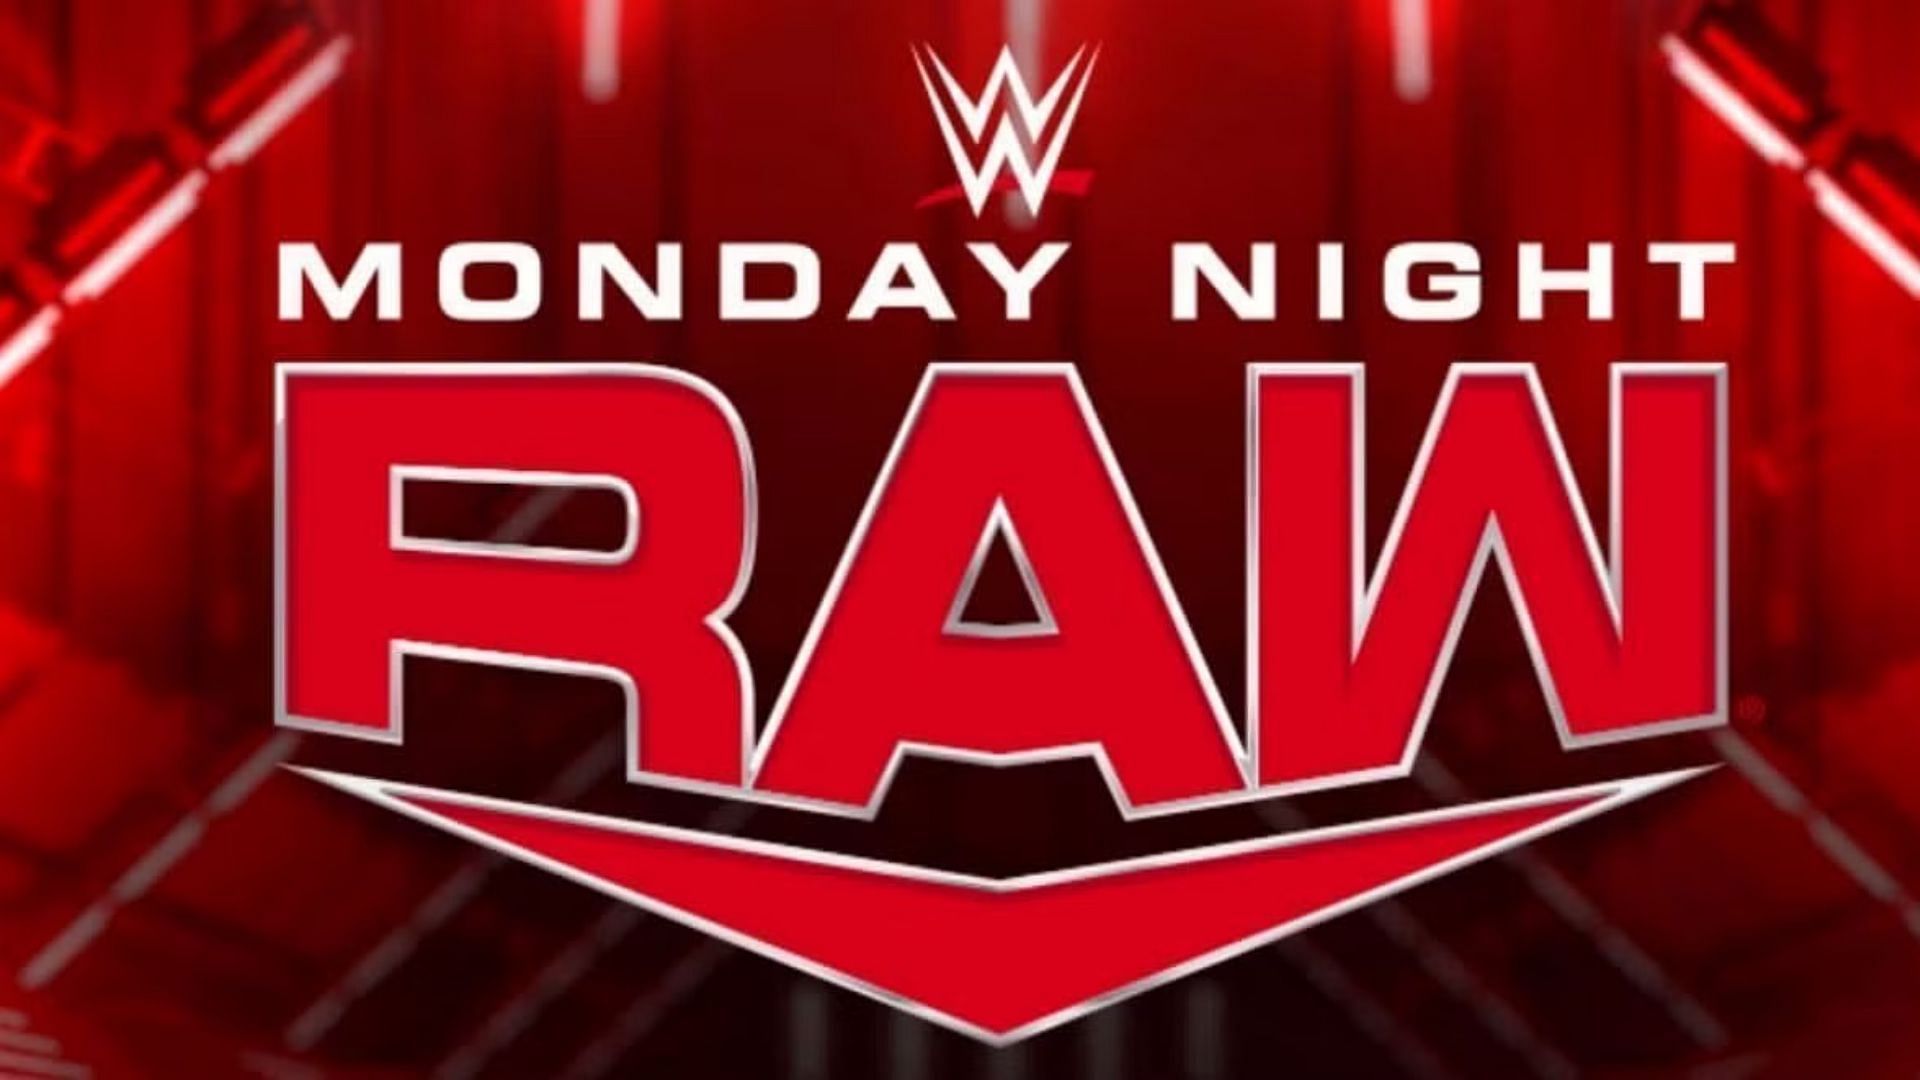 WWE RAW is set to be an enormous show after Night of Champions